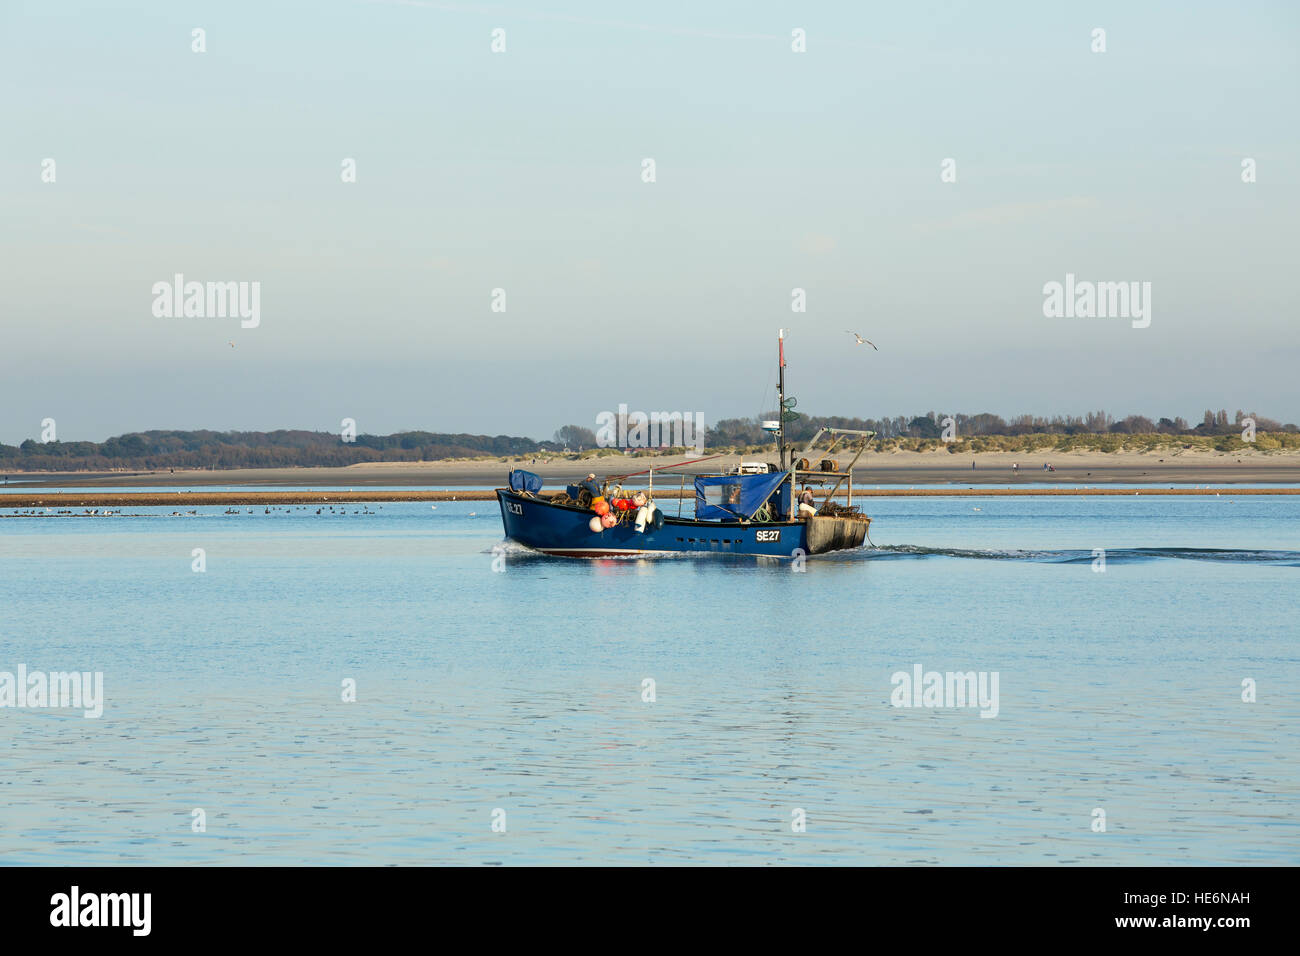 Small Wooden Fishing Boat With Fishing Net In Calm Water Stock Photo,  Picture and Royalty Free Image. Image 92232323.